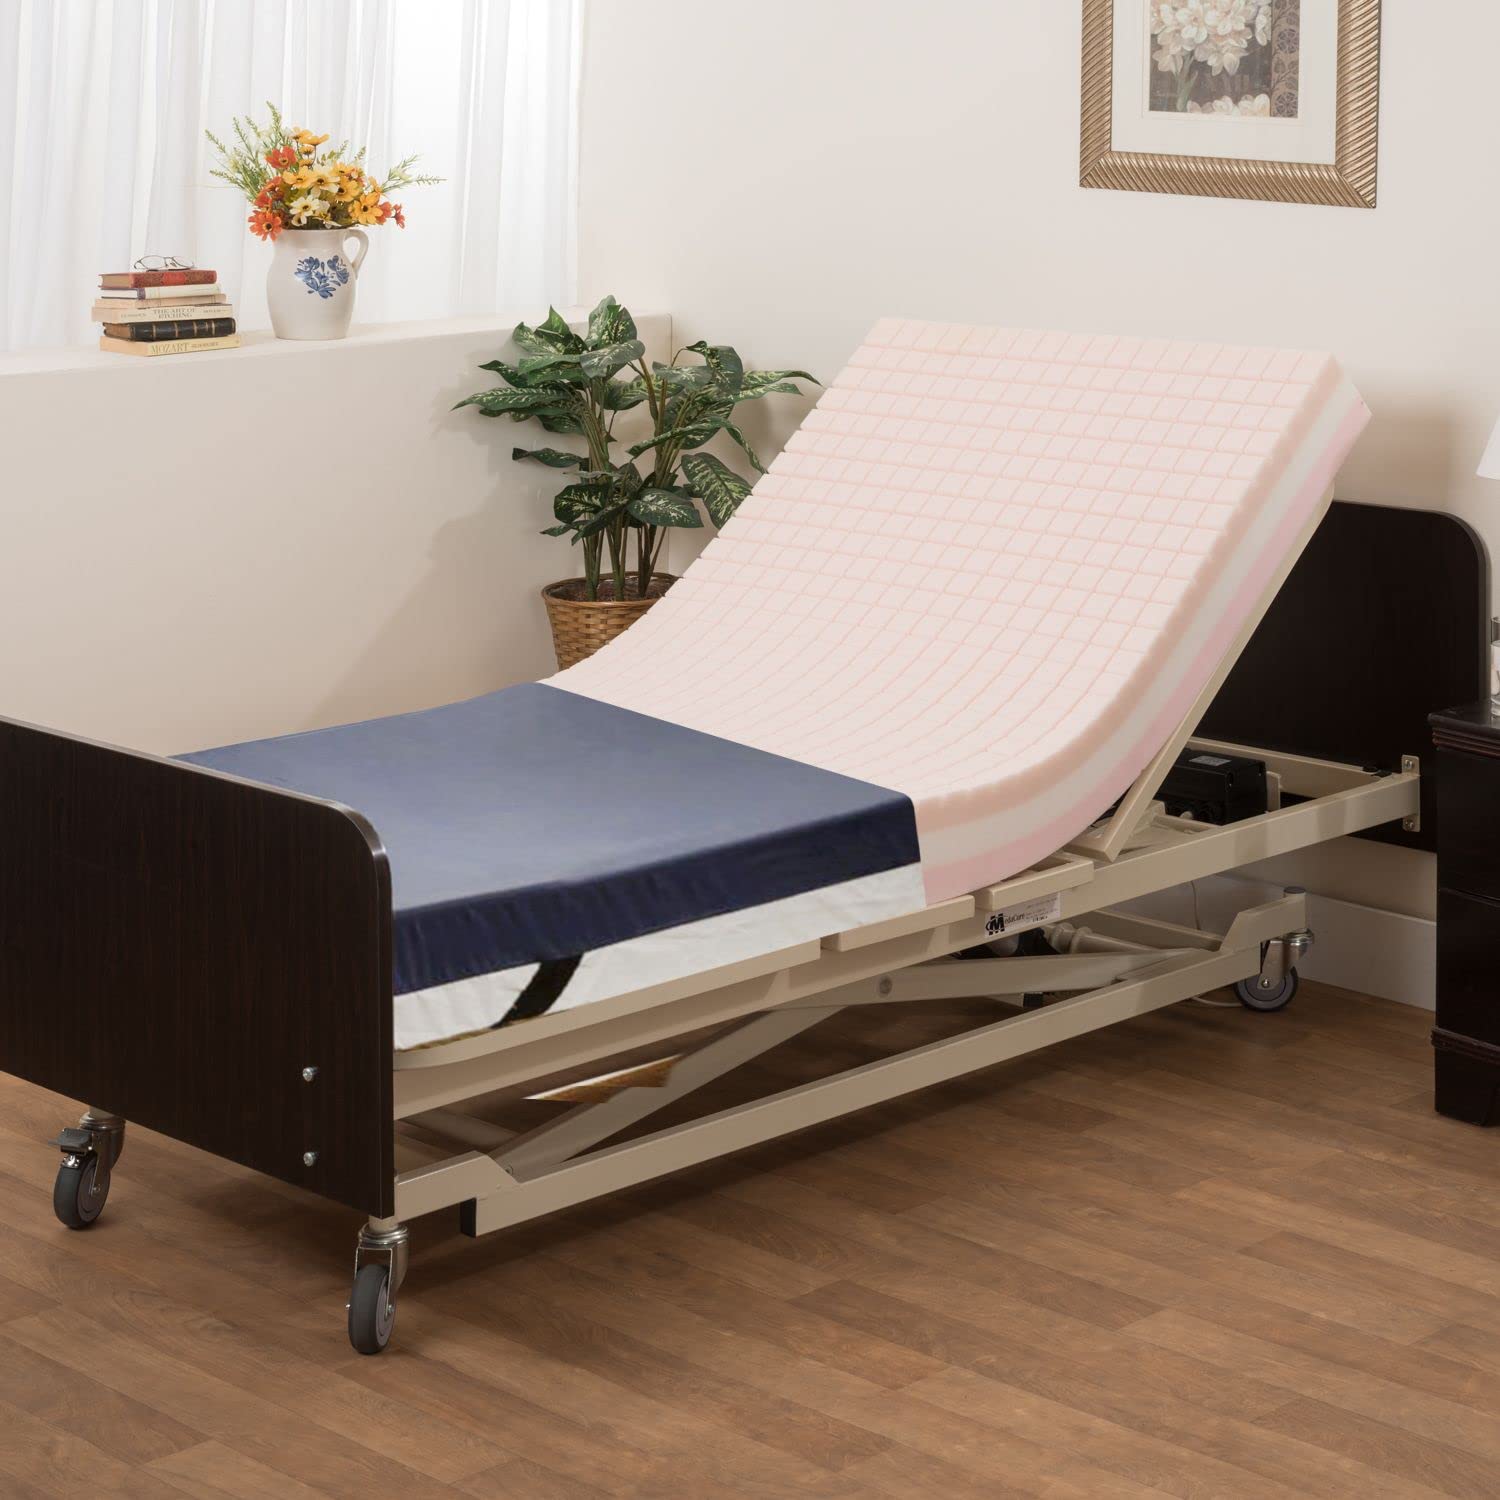 5 Benefits of Renting a Hospital Bed - Harmony Home Medical Supply